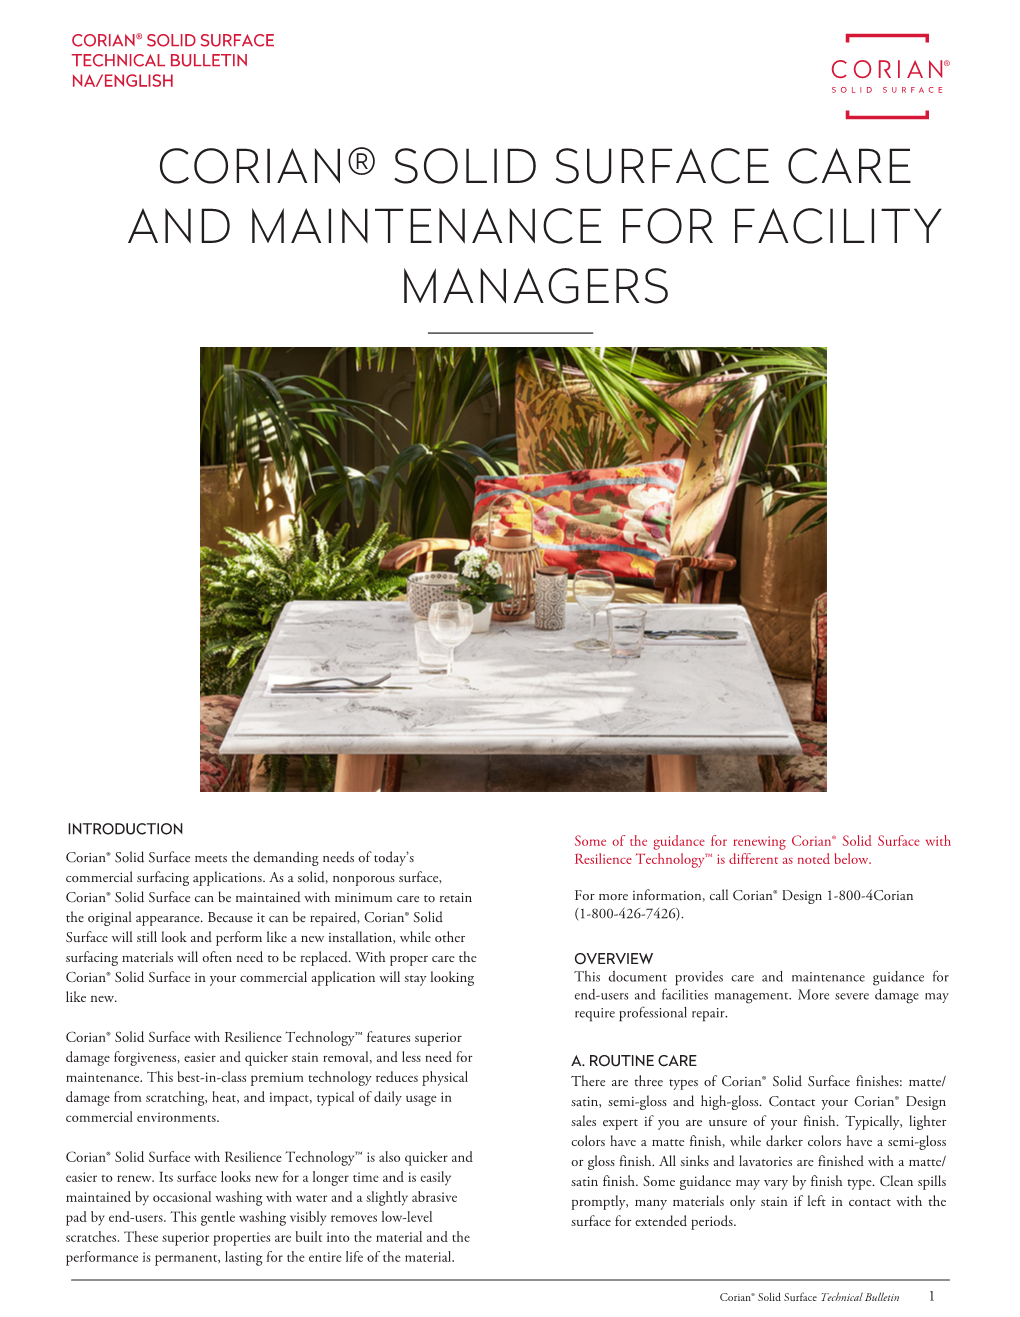 Corian® Solid Surface Care and Maintenance for Facility Managers